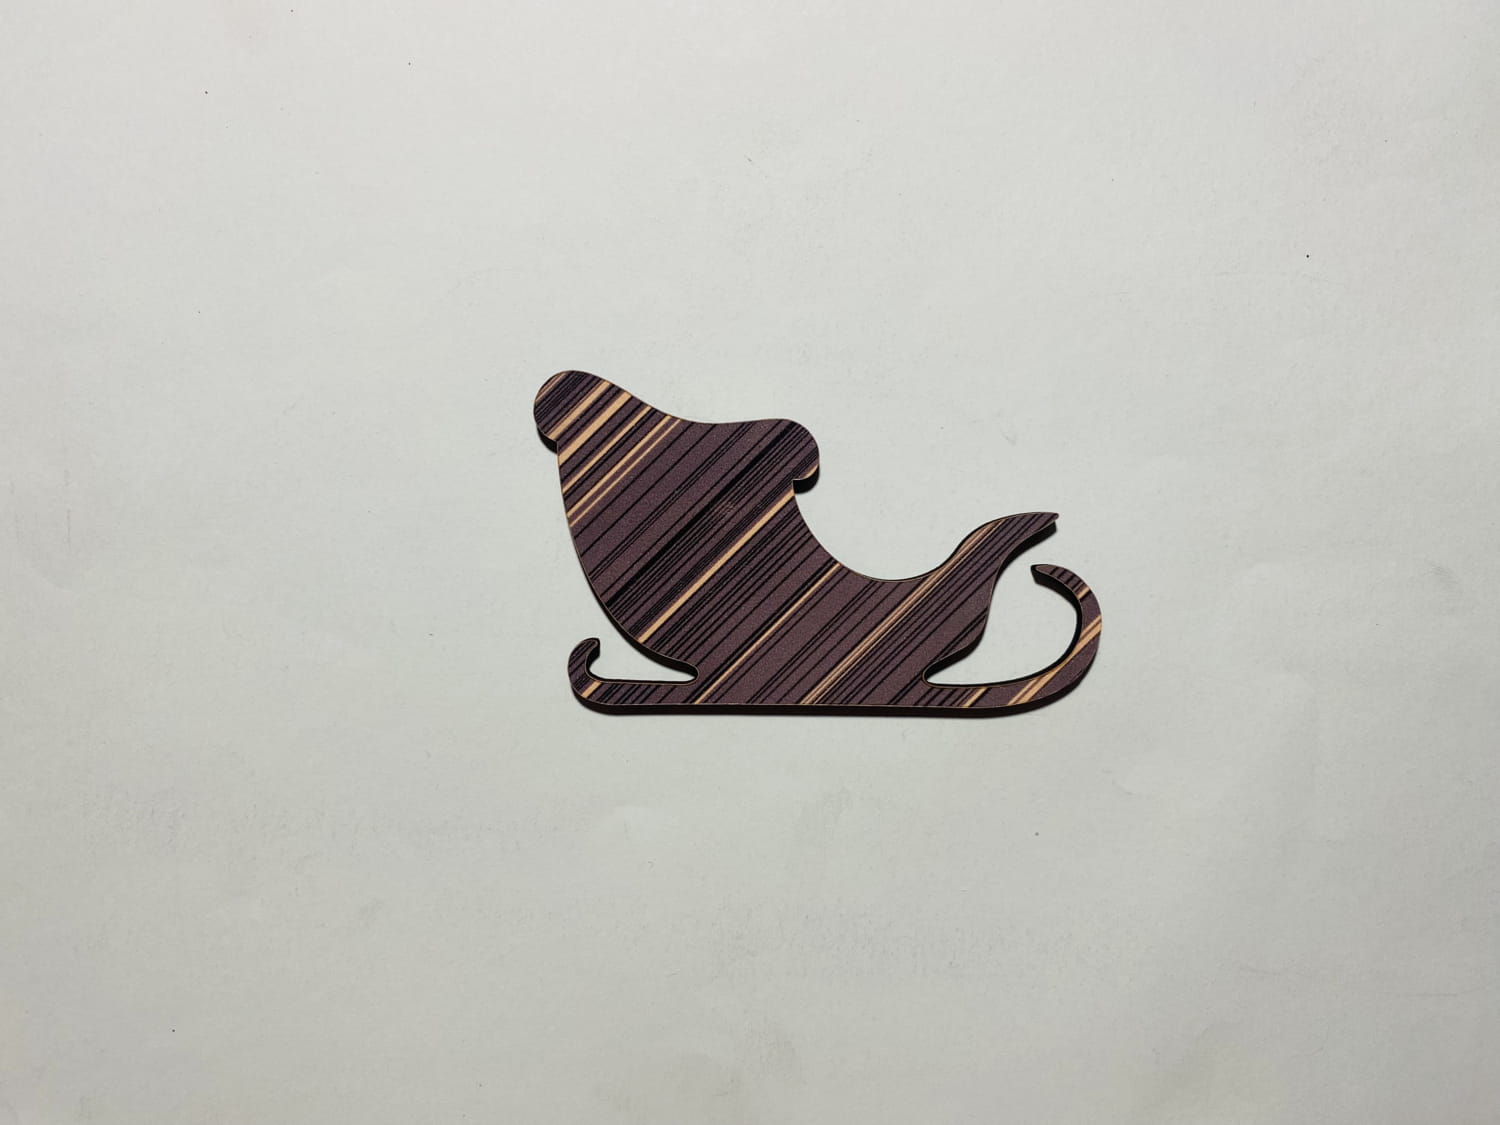 Laser Cut Santa Sleigh Cutout Unfinished Wood Holiday Decor Christmas Free Vector